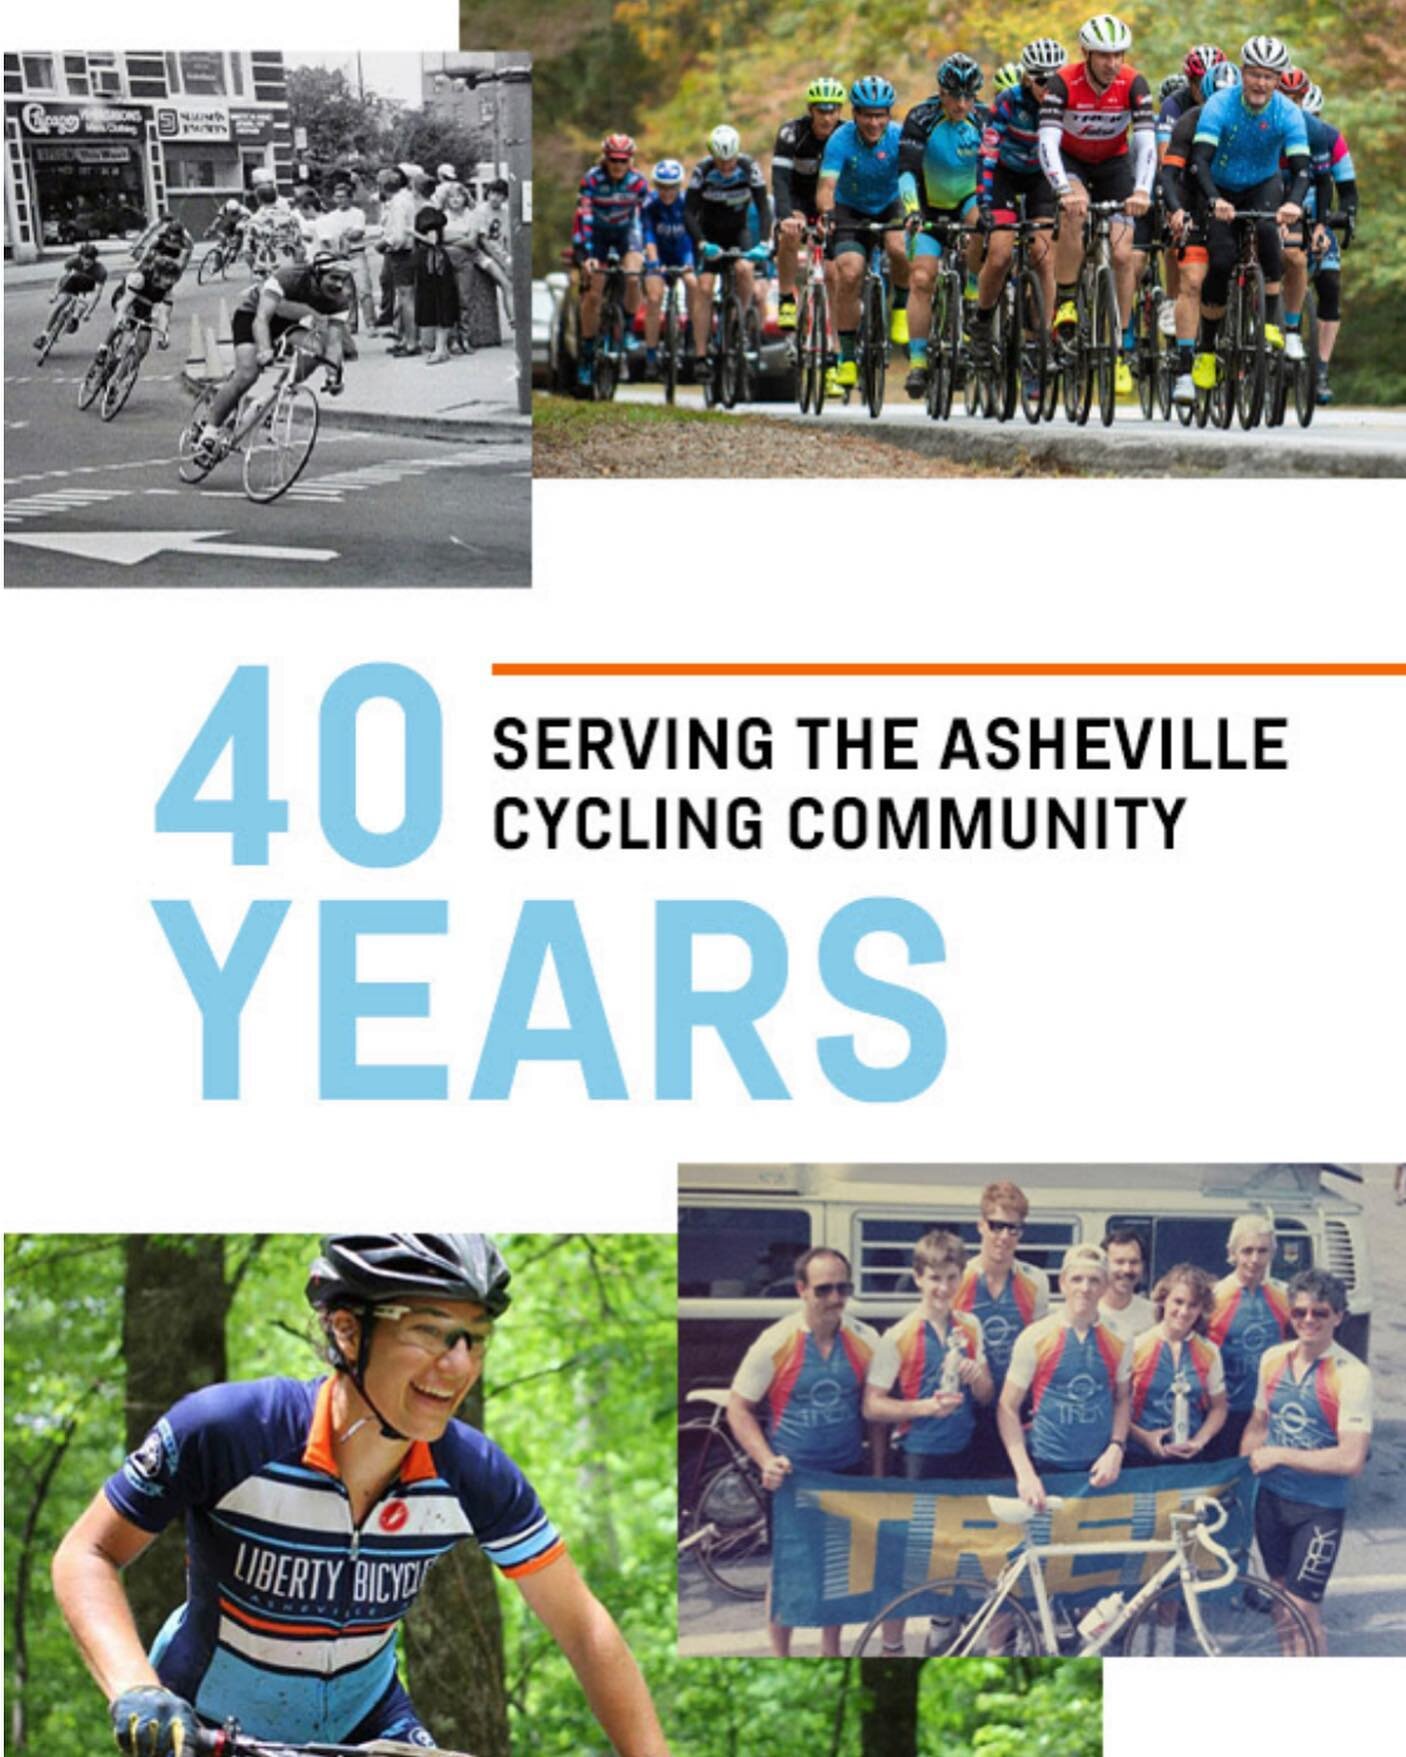 Liberty Bicycles is 40 years old this year, and celebrating by giving back to the Asheville cycling community! They&rsquo;re hosting a raffle that raises money for the local youth cycling NICA chapter, Pisgah Rage:

&ldquo;Starting today you can purc